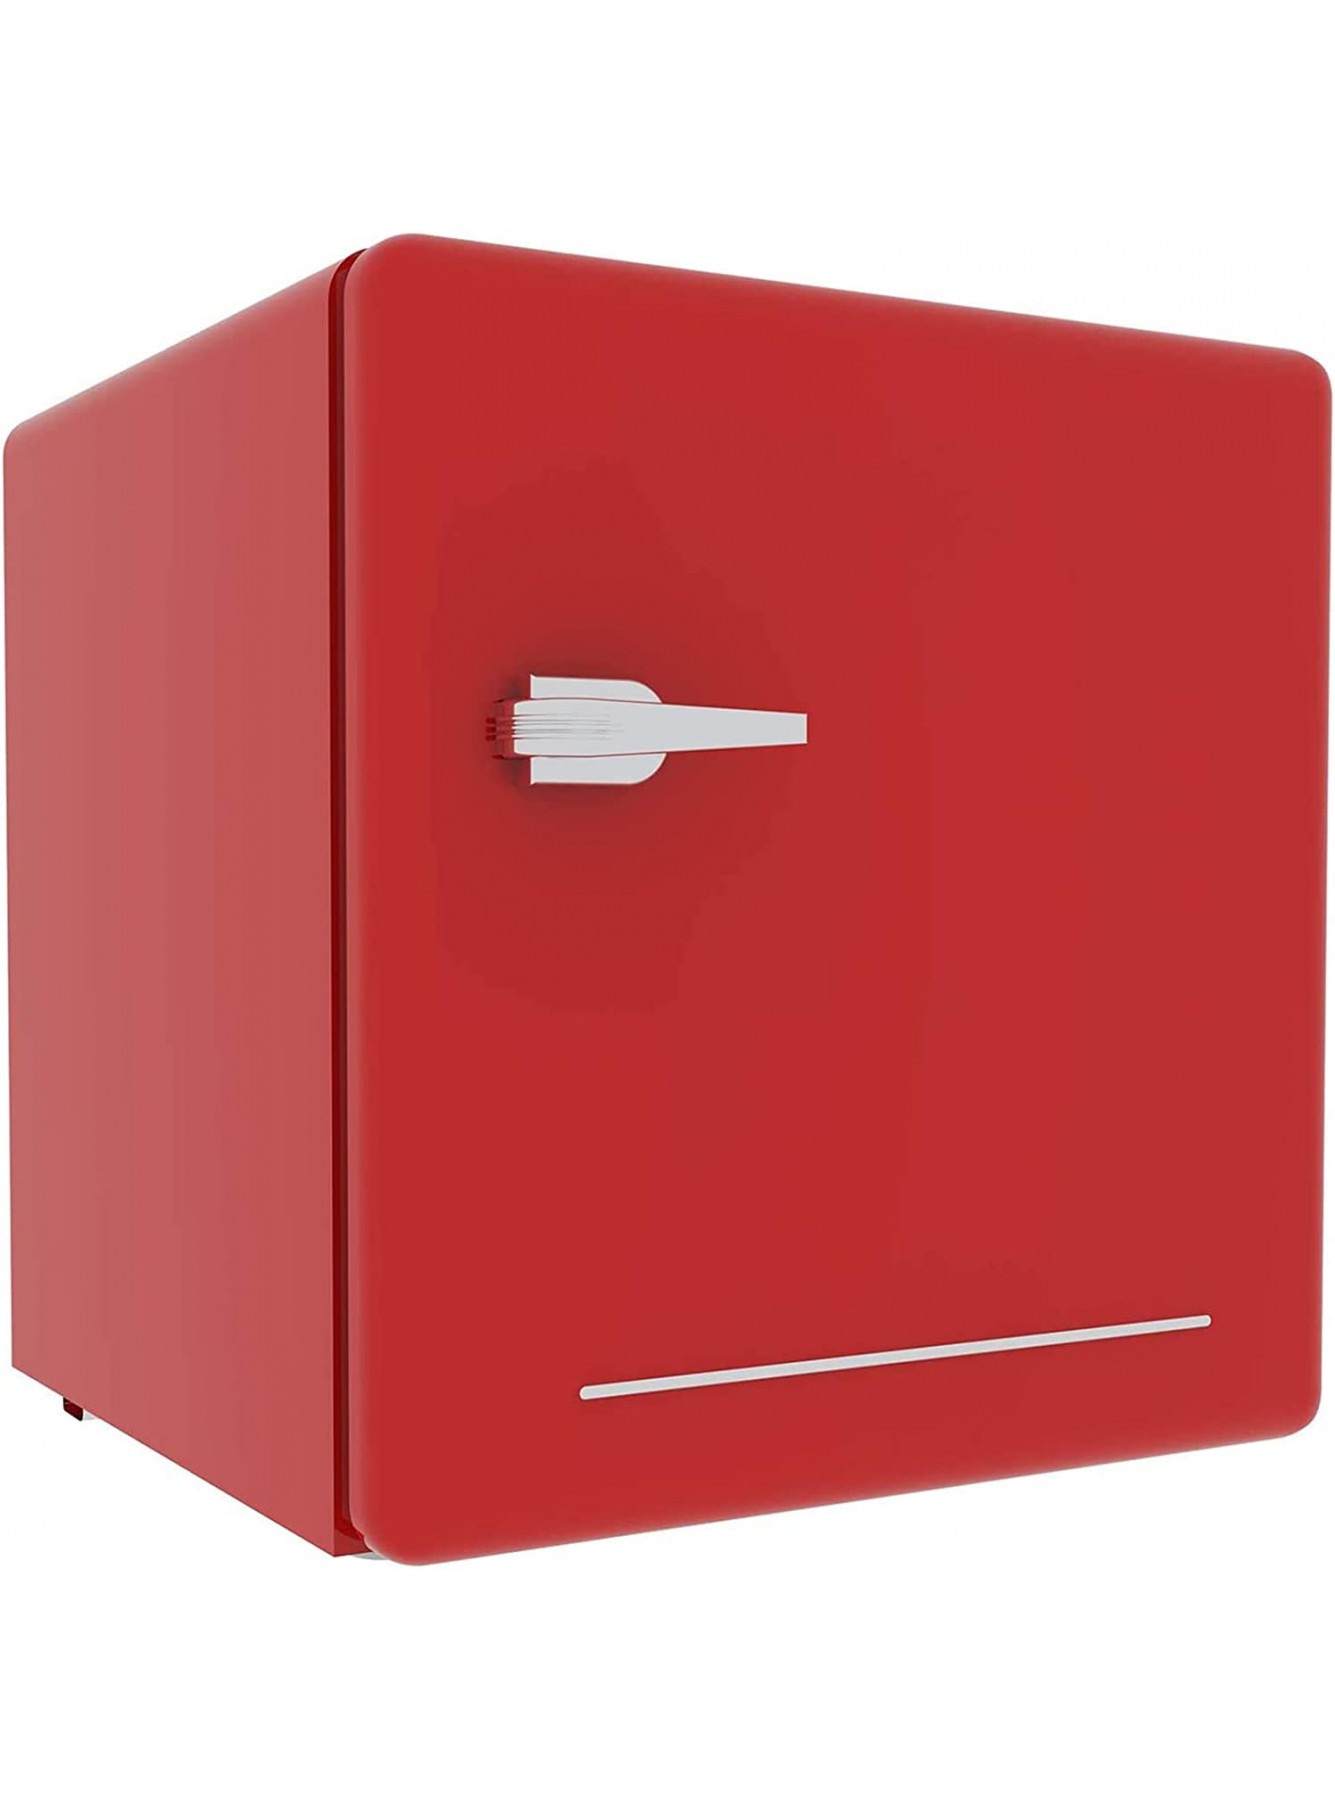 Tesmula Classic Retro Compact Refrigerator Single Door Mini Fridge with Freezer Small Drink Chiller for Home,Office,Dorm Small beauty cosmetics Skin care refrigerated for home,1.6 Cu.Ft Red B09N6D5W7R